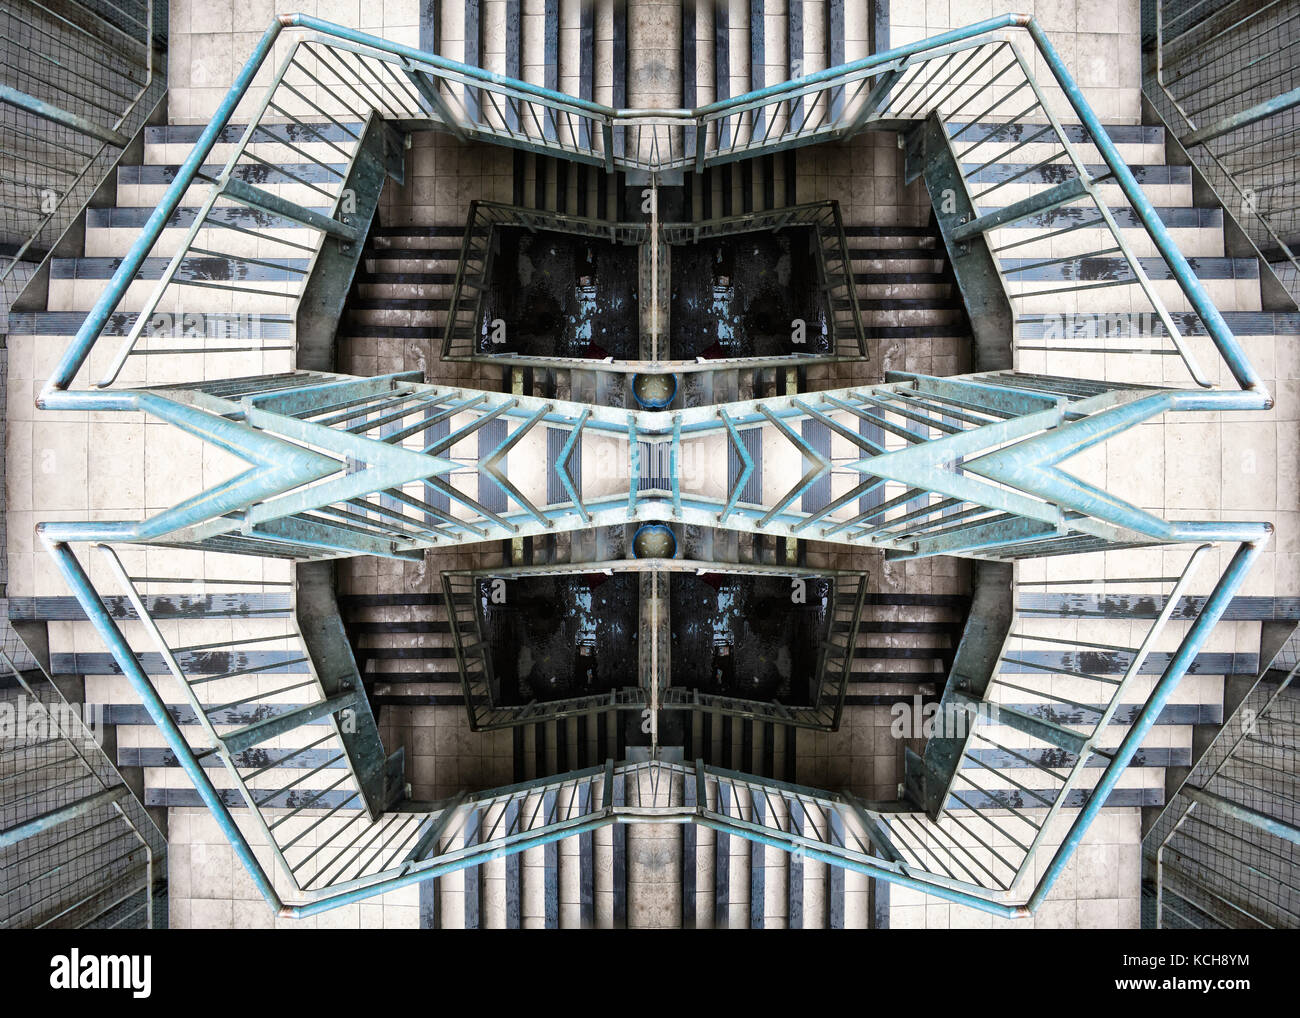 An escher-like view of open-air caged stairwell in wembly Stock Photo